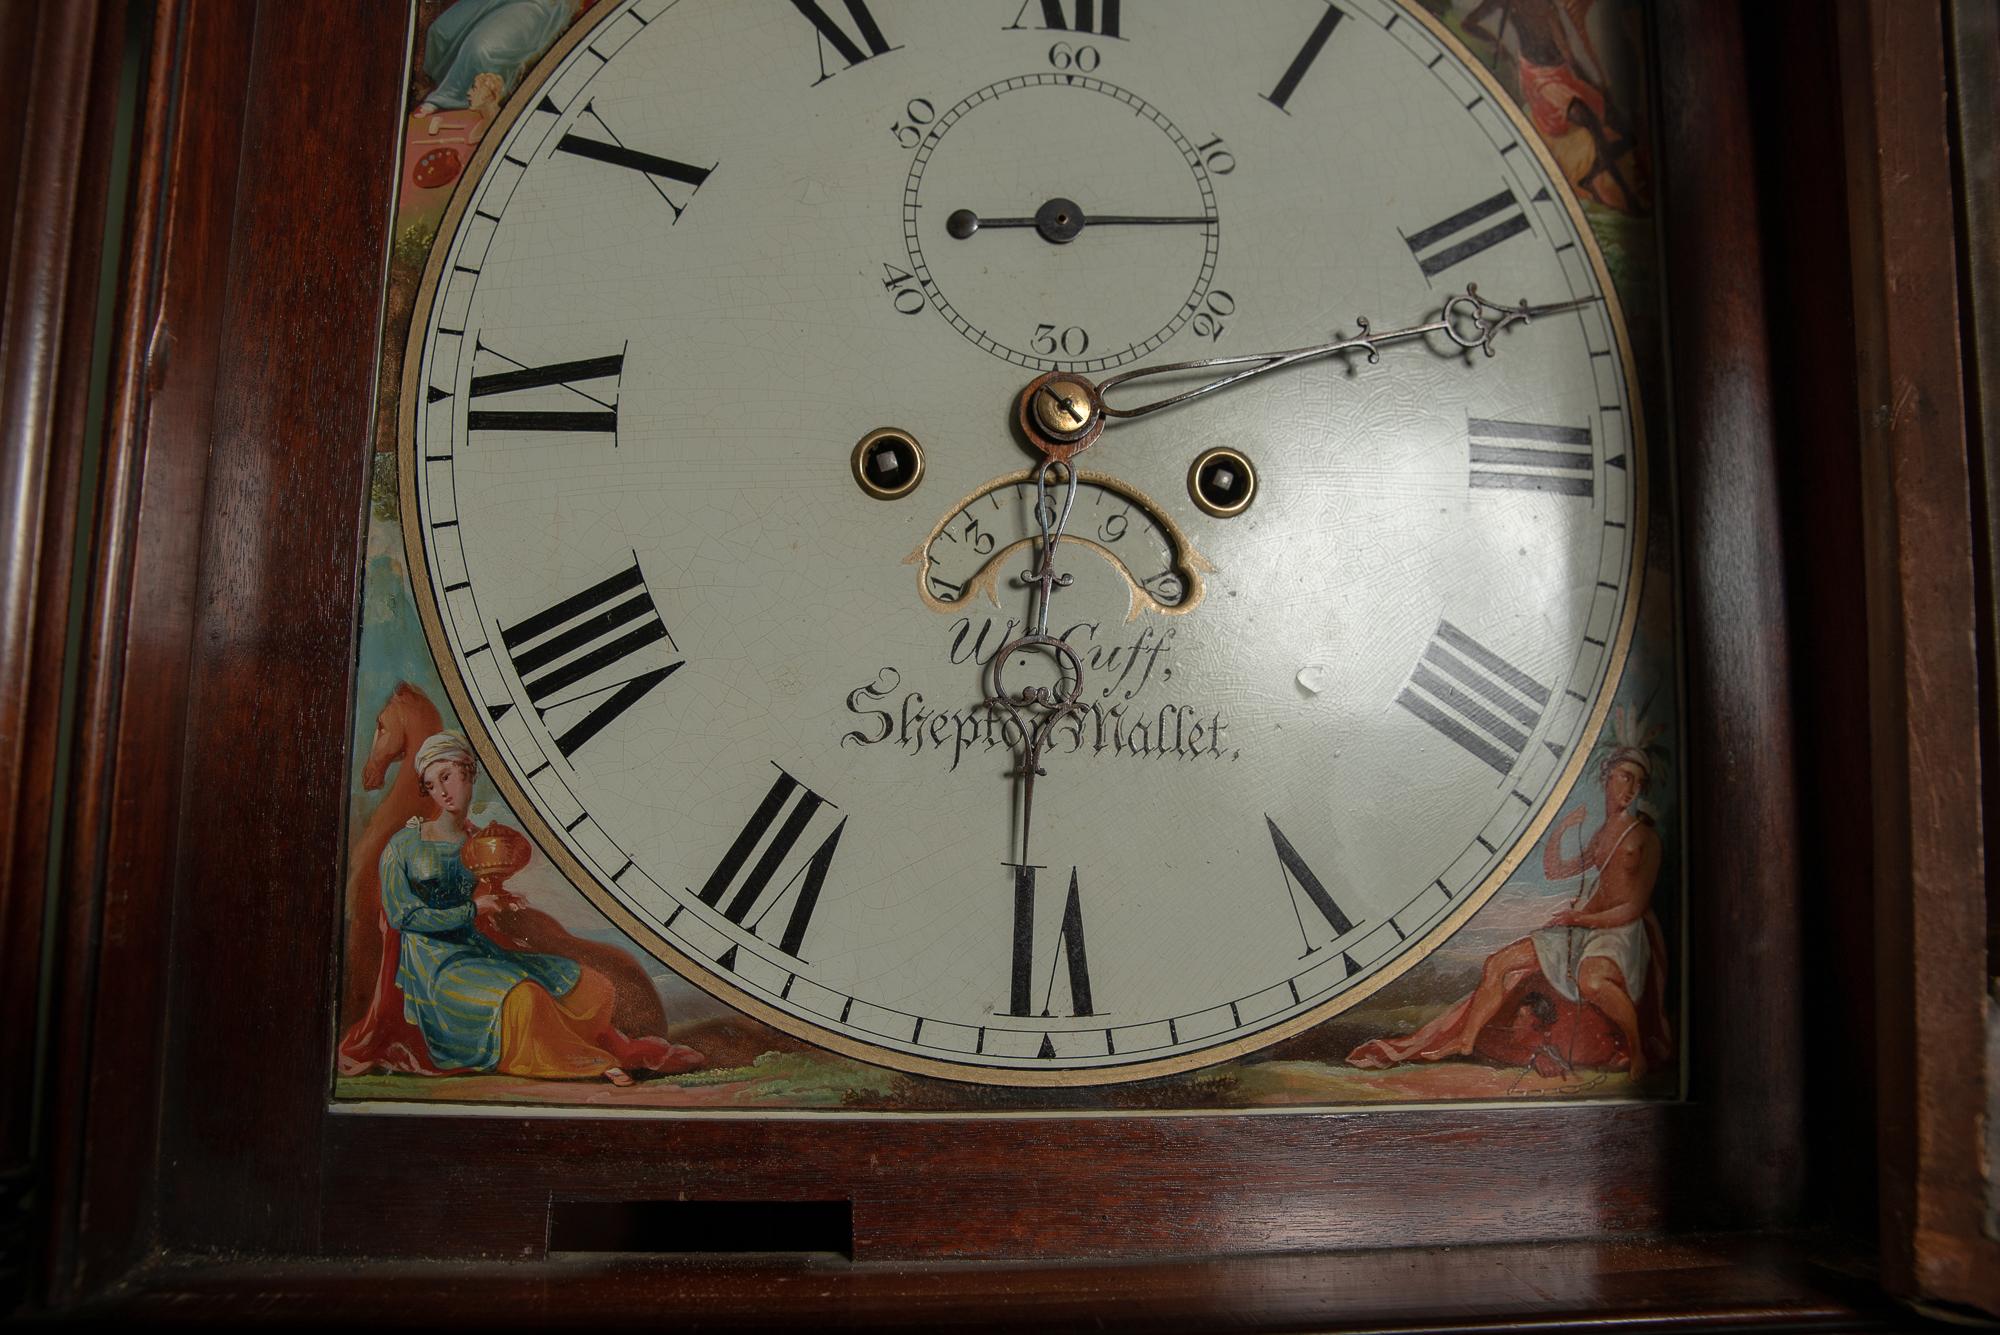 Inlay Early 19th Century Moon Phase Clock by William Cuff of Shepton Mallet For Sale